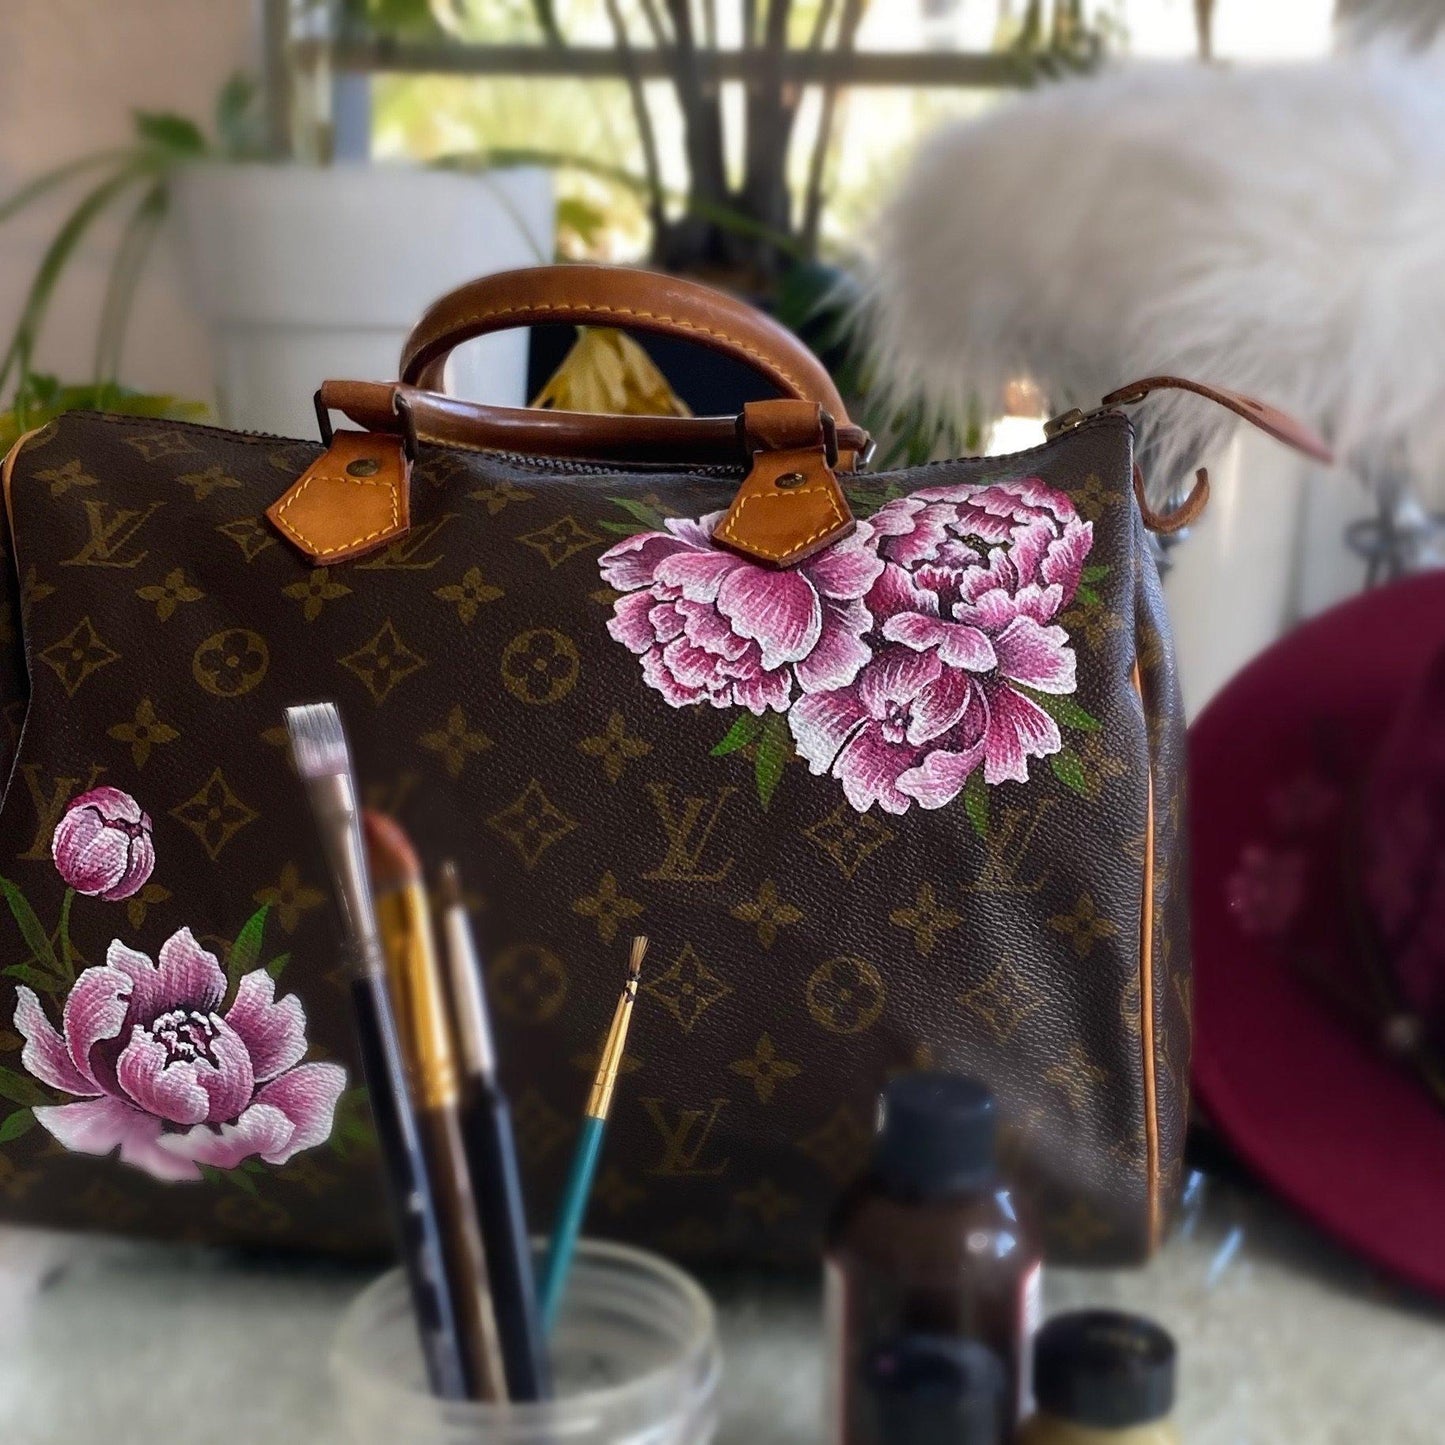 Pink Peonies Artwork, Painted on a Louis Vuitton Speedy 30  by New Vintage